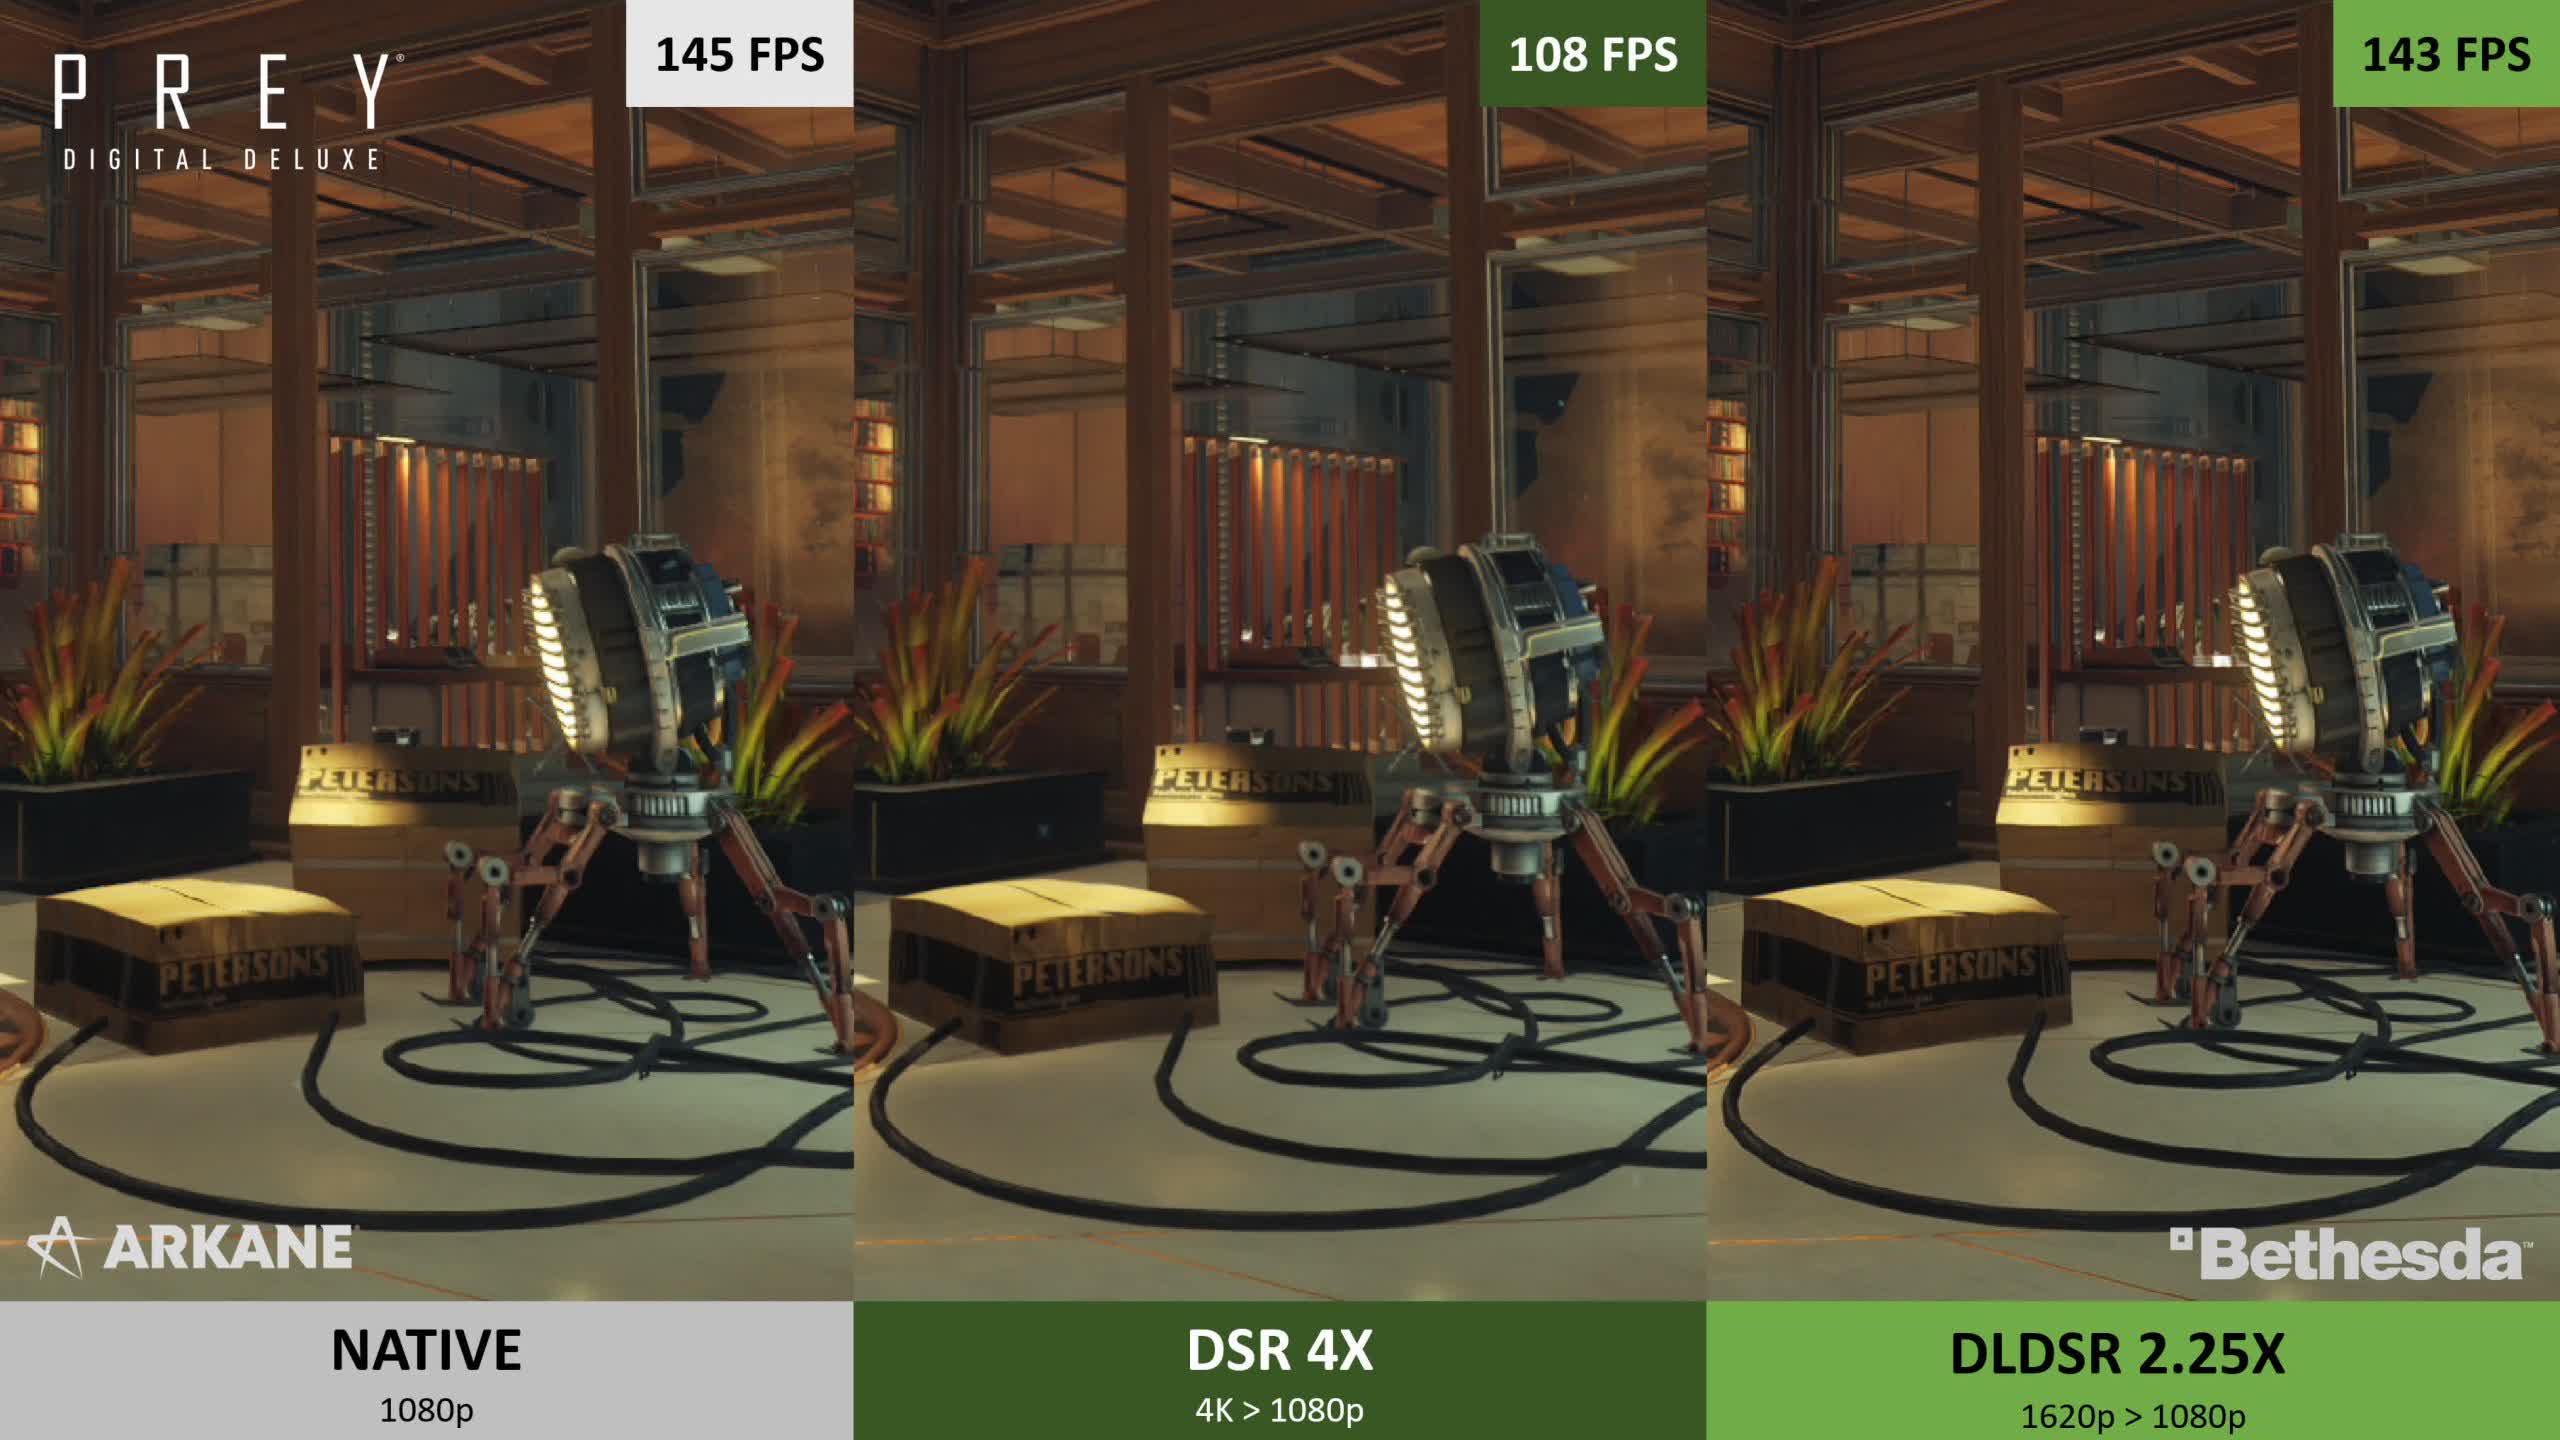 Latest Nvidia drivers reveal AI-powered downscaling feature called DLDSR